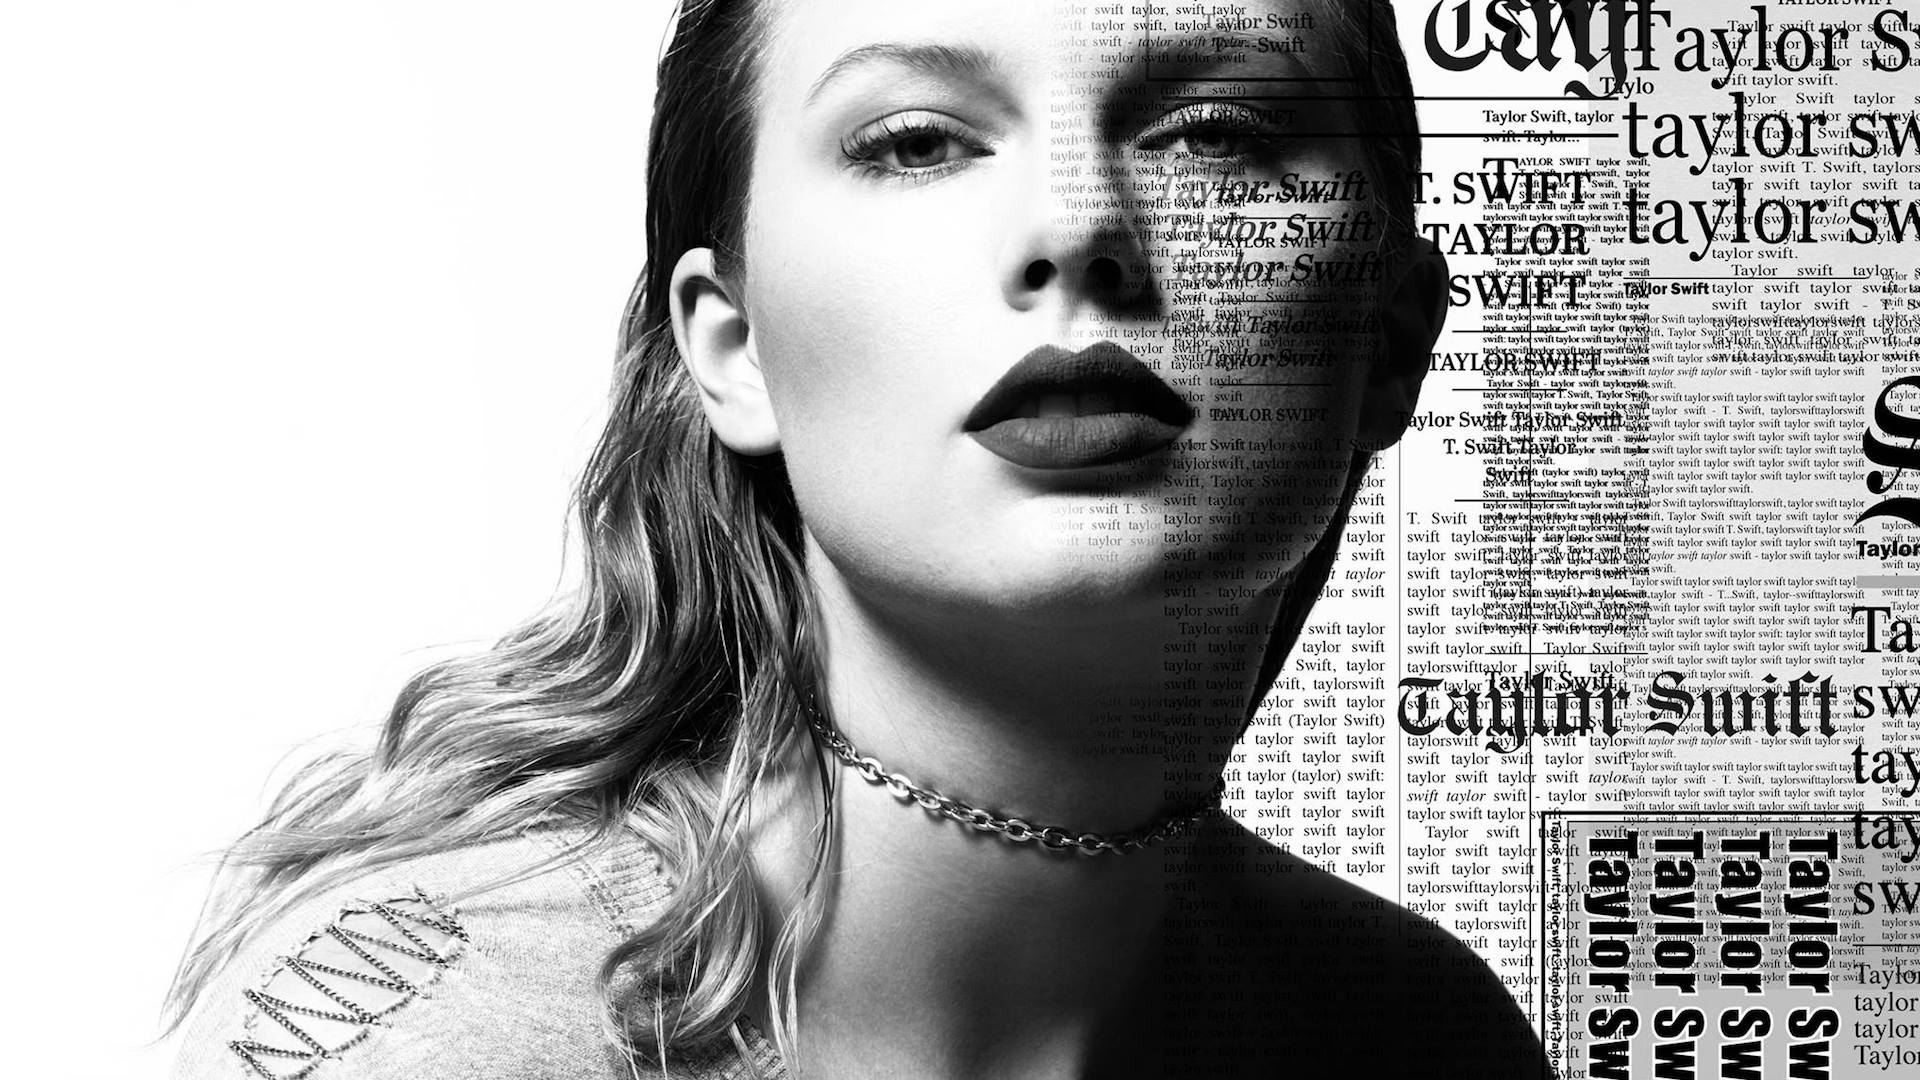 CONFIRMED: Taylor Swift To Bring 'Reputation' Tour To Australia